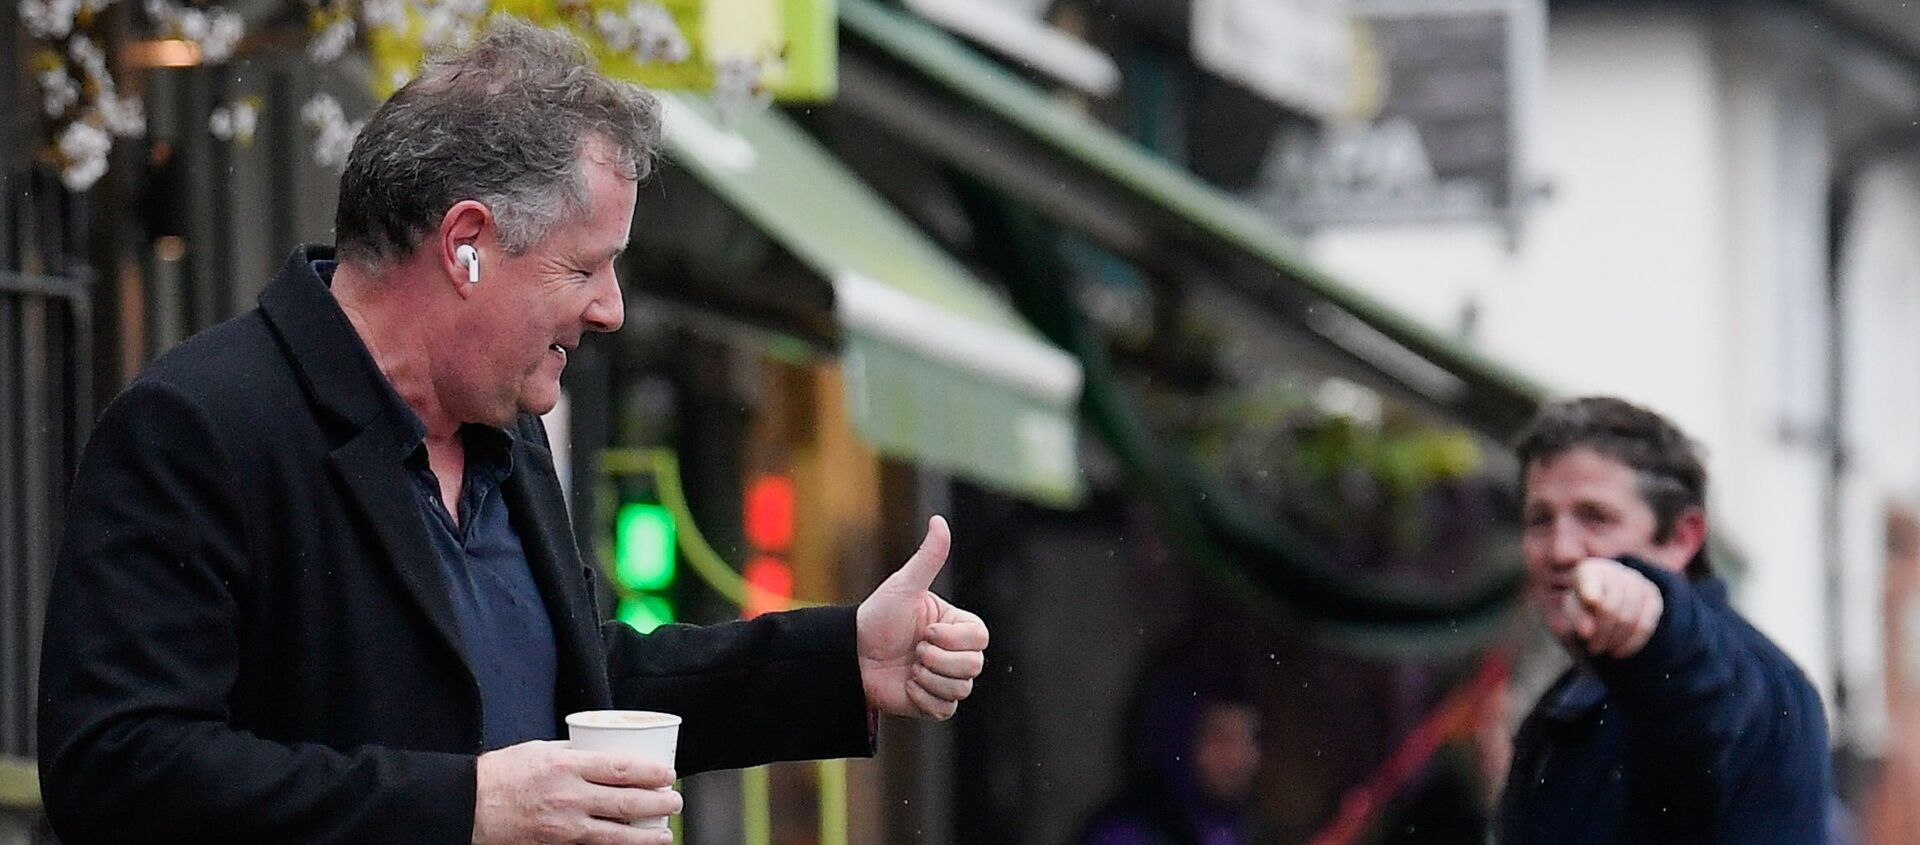 Journalist and television presenter Piers Morgan gestures back to a passerby as he walks near his house, after he left his high-profile breakfast slot with the broadcaster ITV, following his long-running criticism of Prince Harry's wife Meghan, in London, Britain, March 10, 2021 - Sputnik International, 1920, 13.03.2021